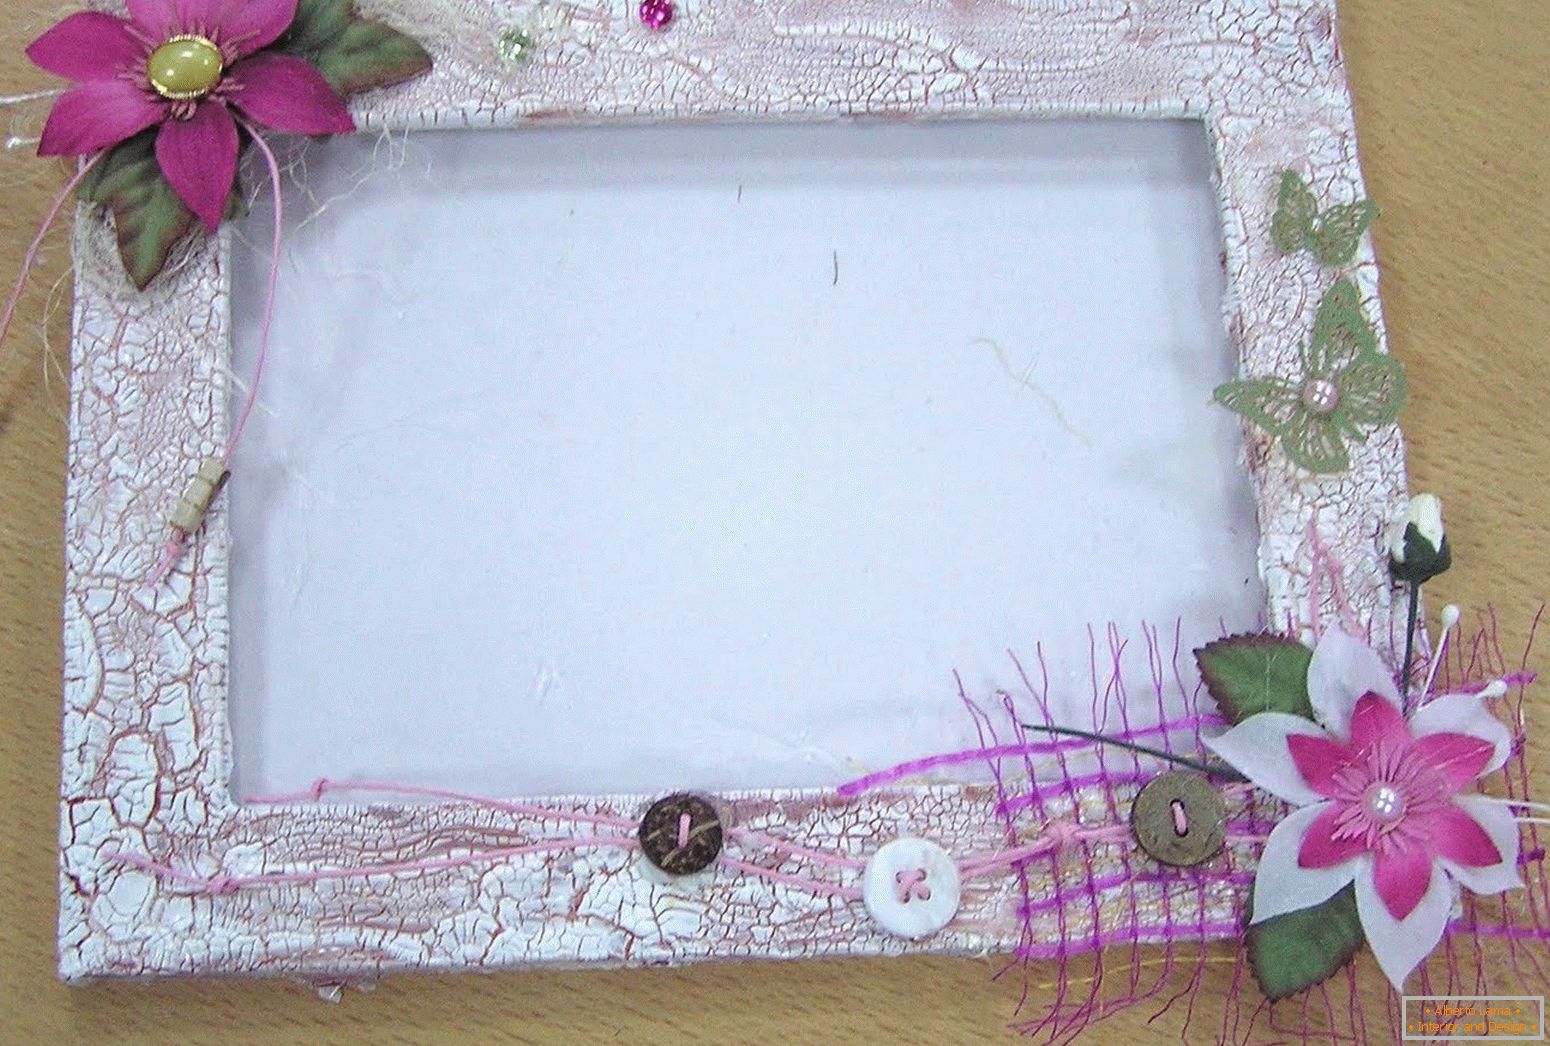 Decorating the frame with artificial flowers